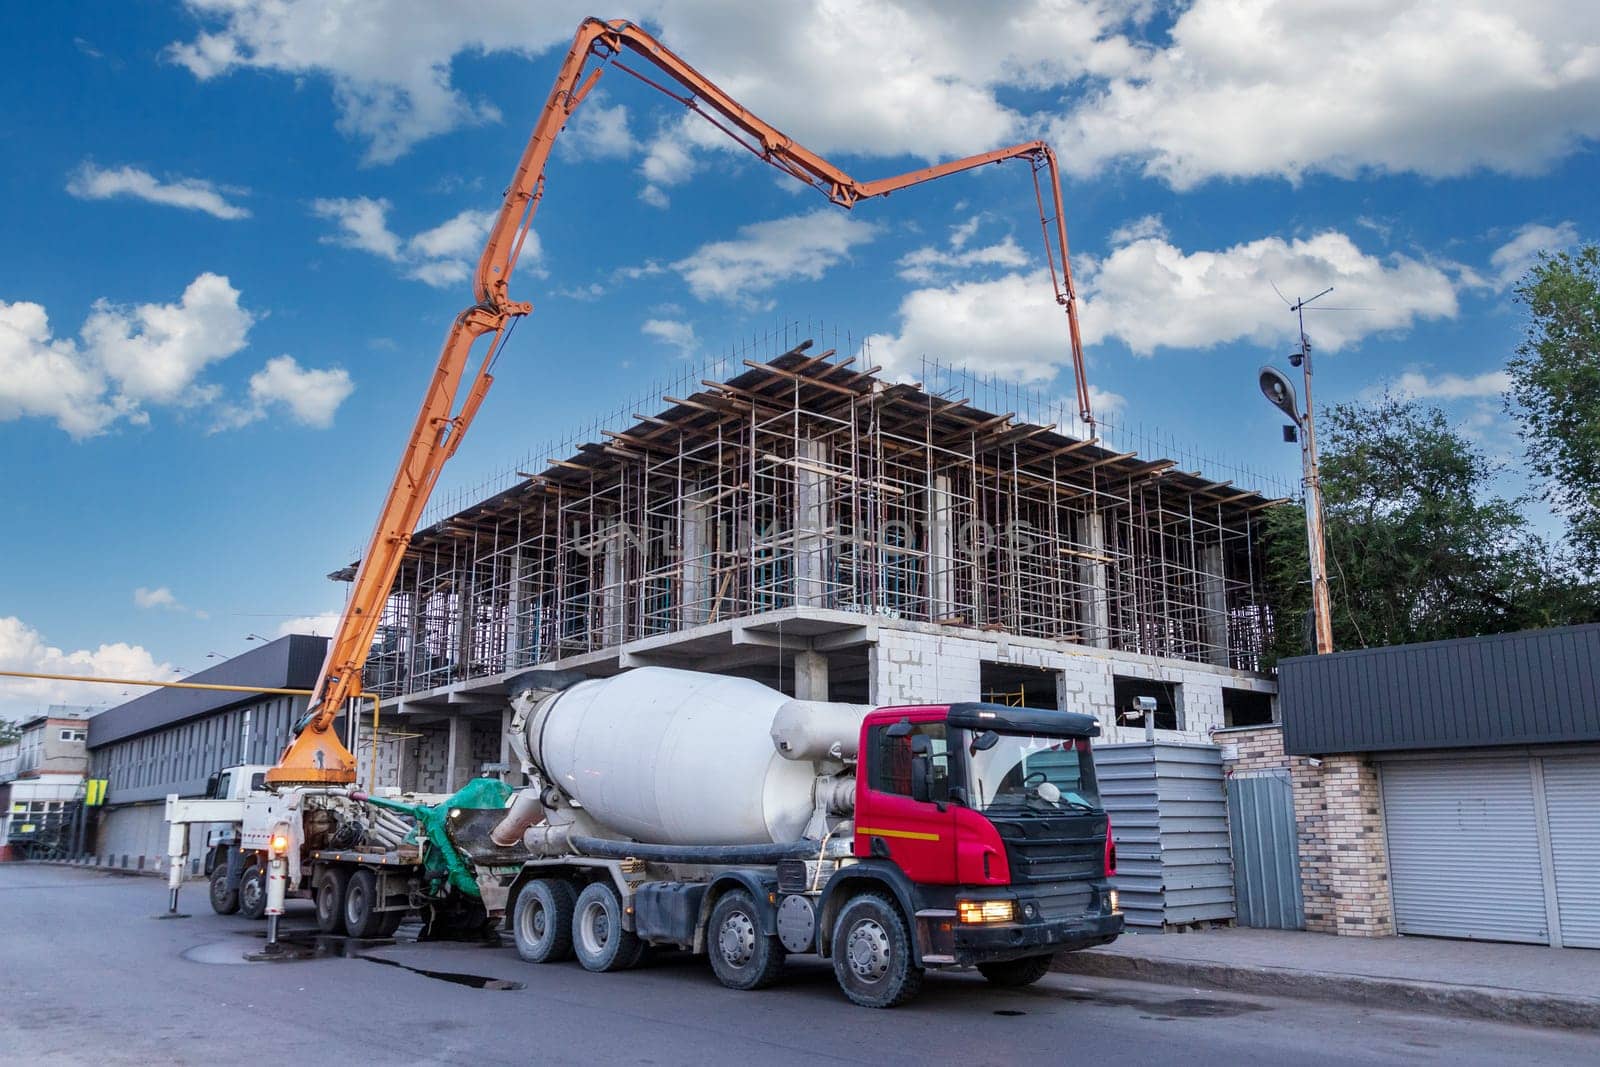 A concrete pump truck takes concrete from a concrete mixer truck and pours the floor at a construction site.